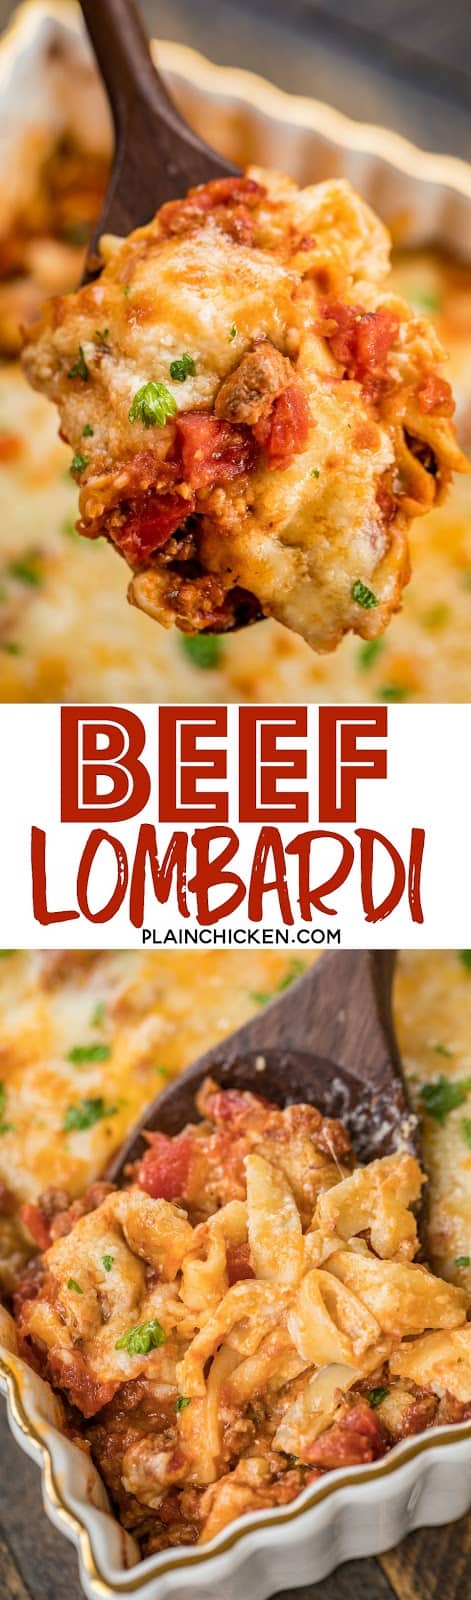 Beef Lombardi Casserole - comfort food at its best! SO easy! Can be made ahead and frozen for up to a month. Ground beef, tomatoes, diced tomatoes and green chiles, tomato paste, egg noodles, sour cream cheddar, parmesan and mozzarella. Everyone cleaned their plate! Dinner success!! #freezermeal #casserole #easydinnerrecipe